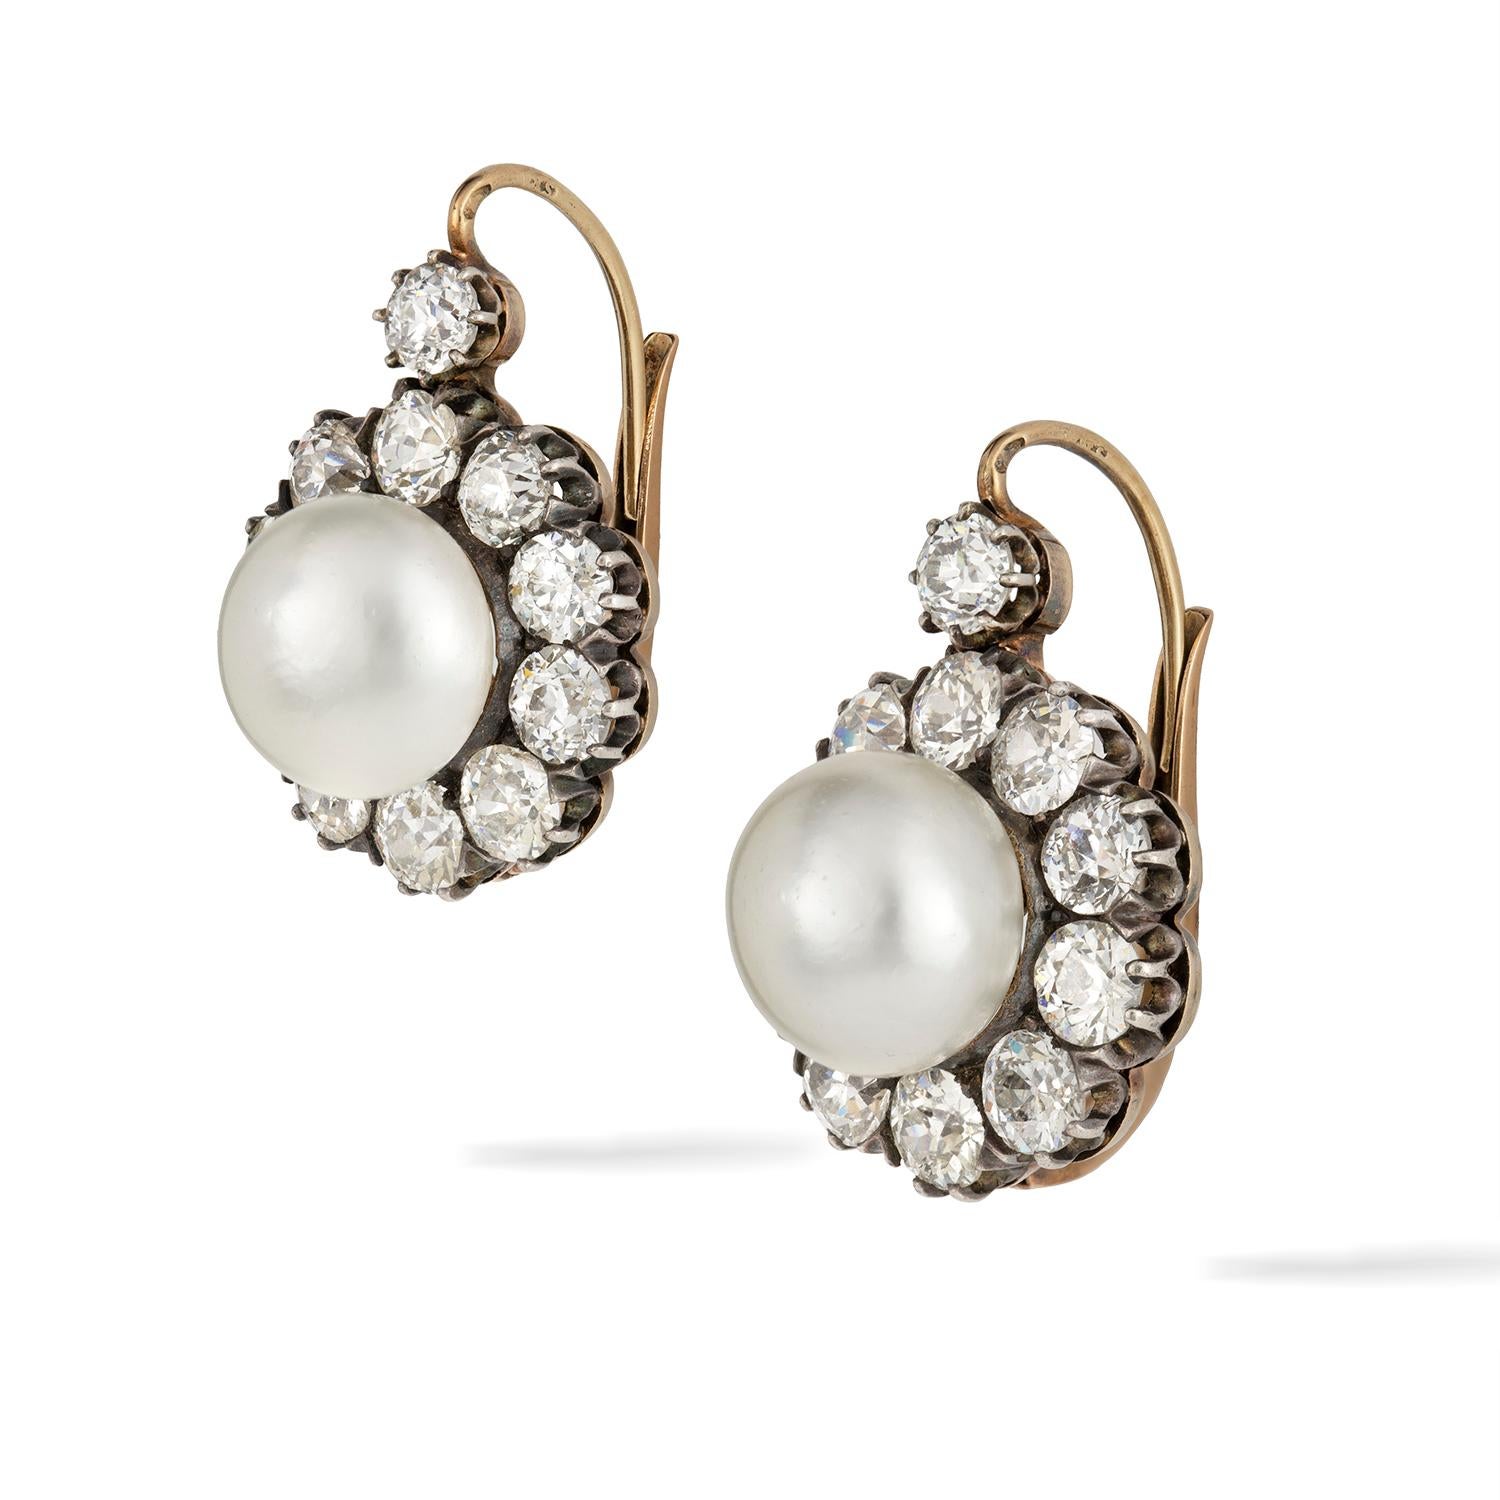 An Important pair of natural pearl and diamond cluster earrings, each button-shape pearl measuring 11.15-11.30mm in diameter, accompanied by report of the German Foundation for Gemstone Research no 025323 stating that the pearls to be natural and of